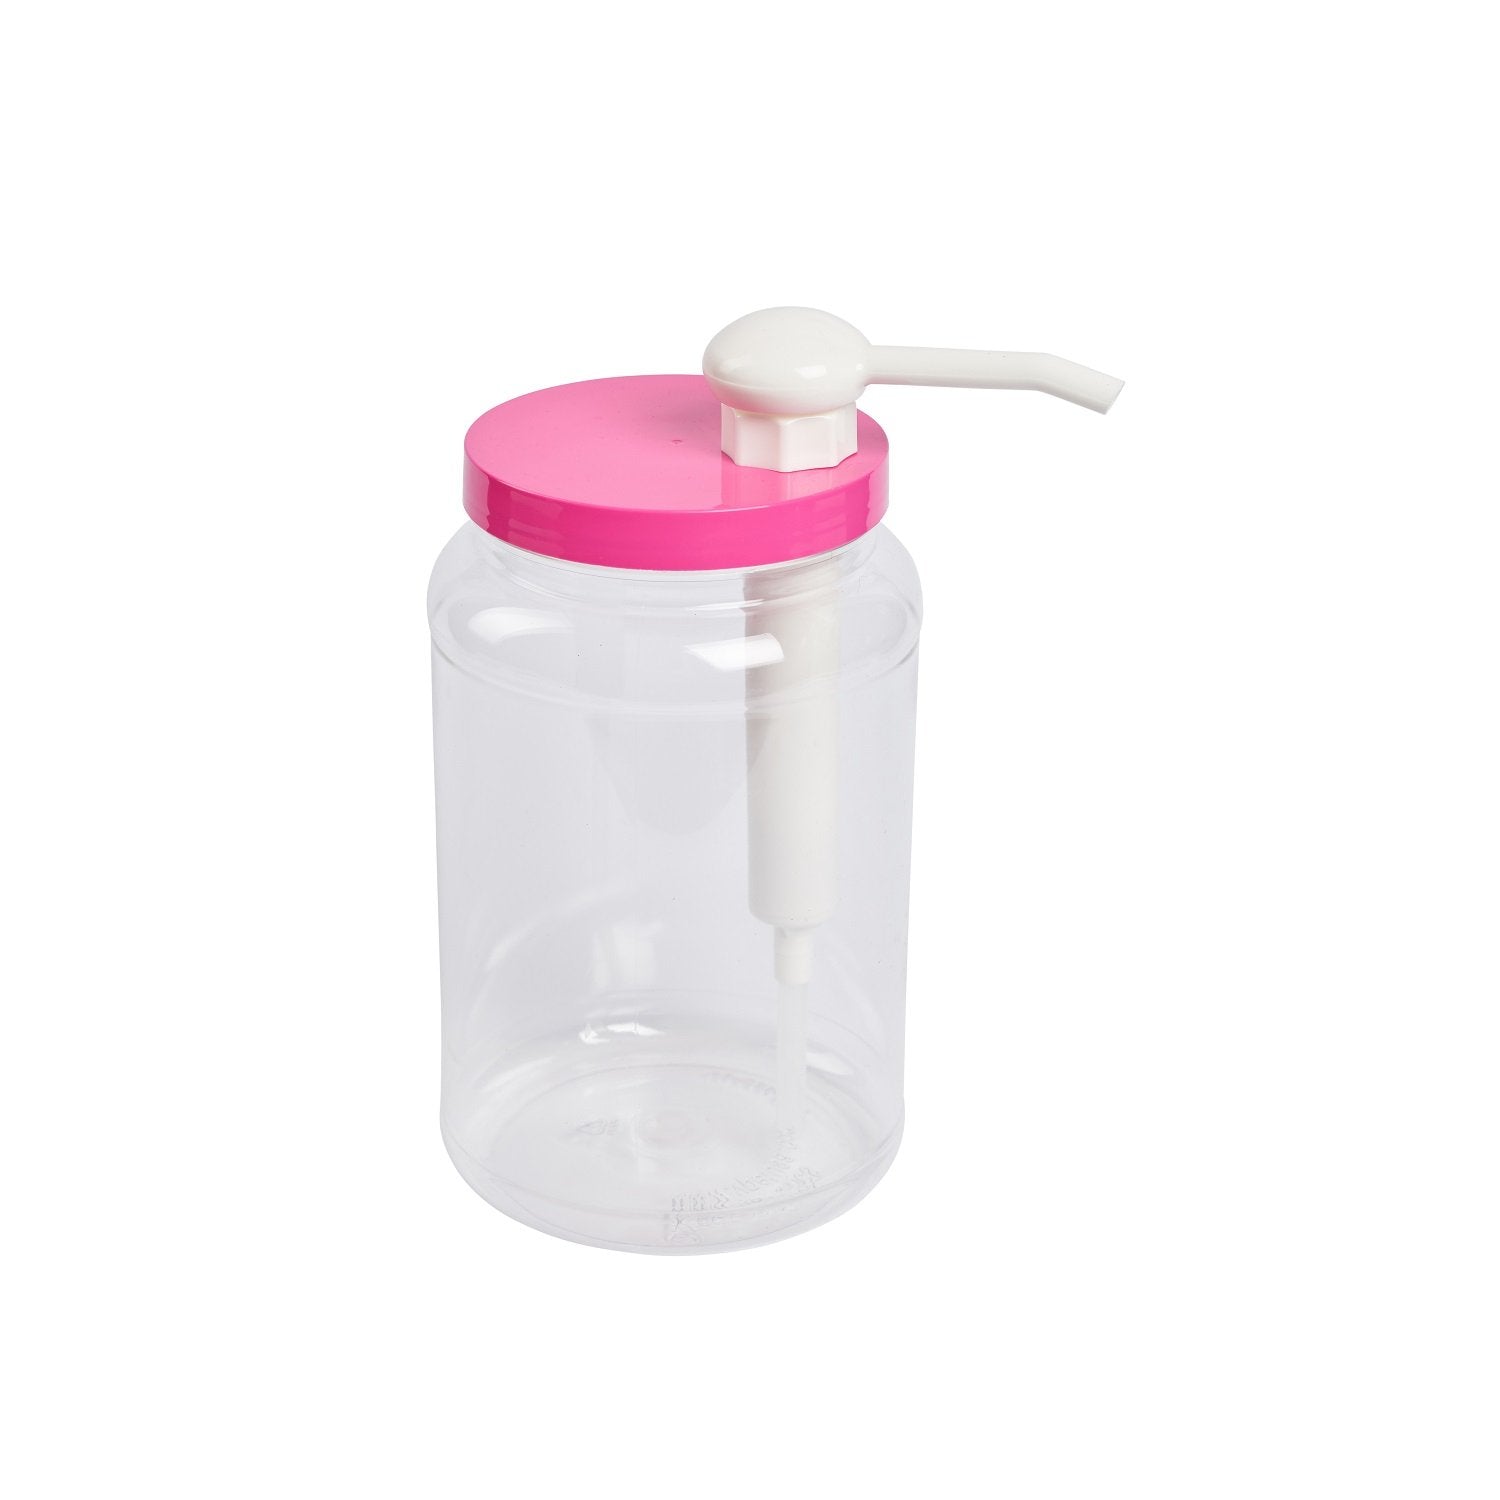 Lotion Container with Pump (Display Lotion Container)